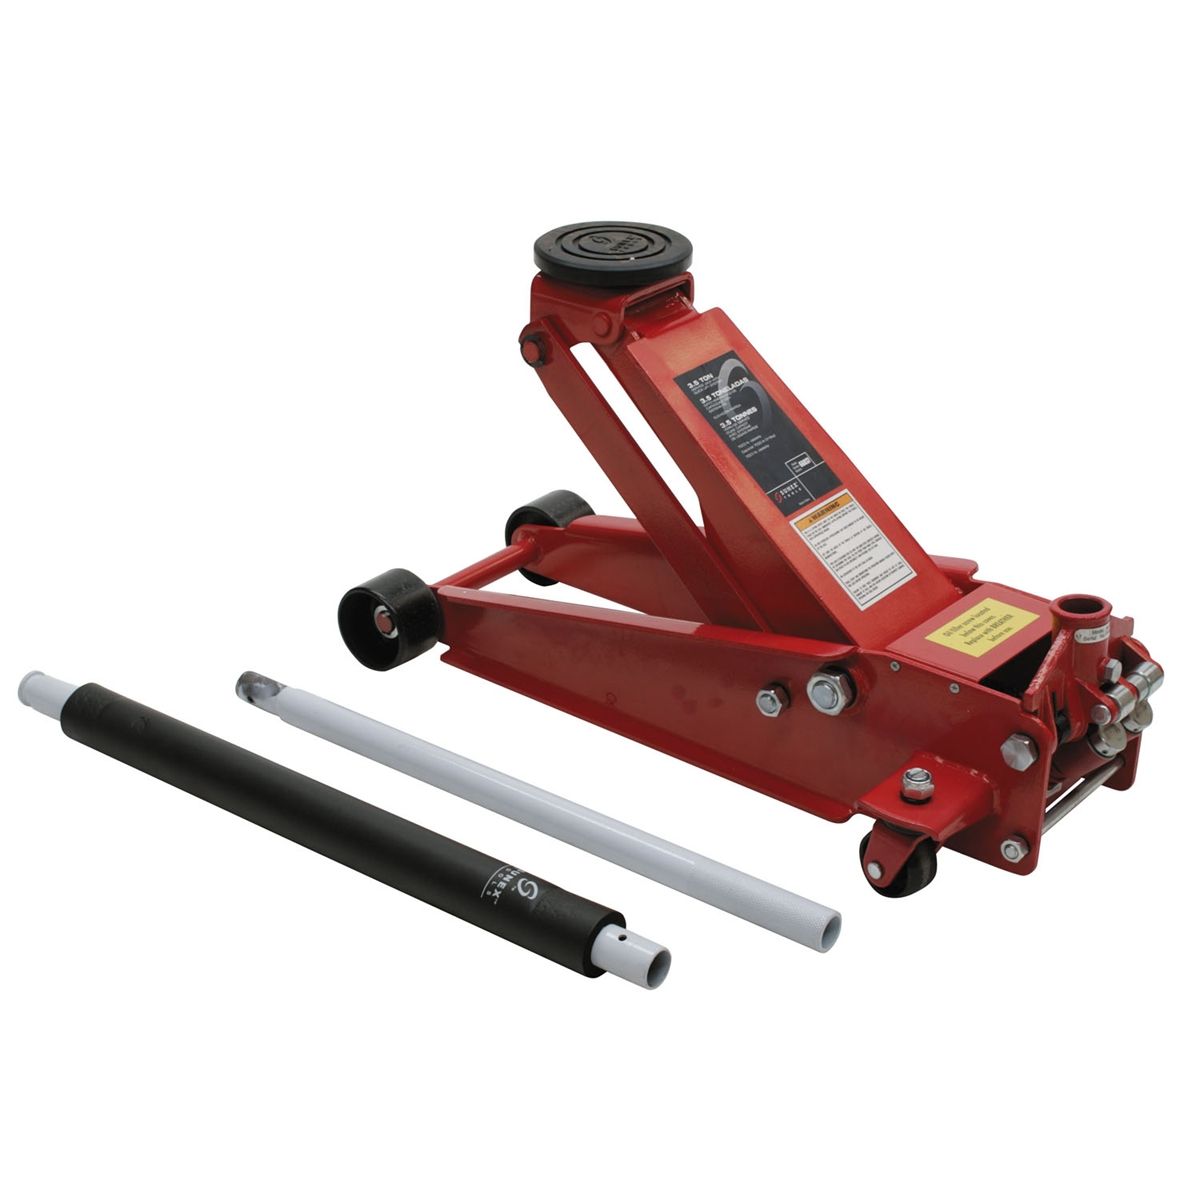 z-sup Service Jack w/ Quick Lifting System - 3.5 Ton